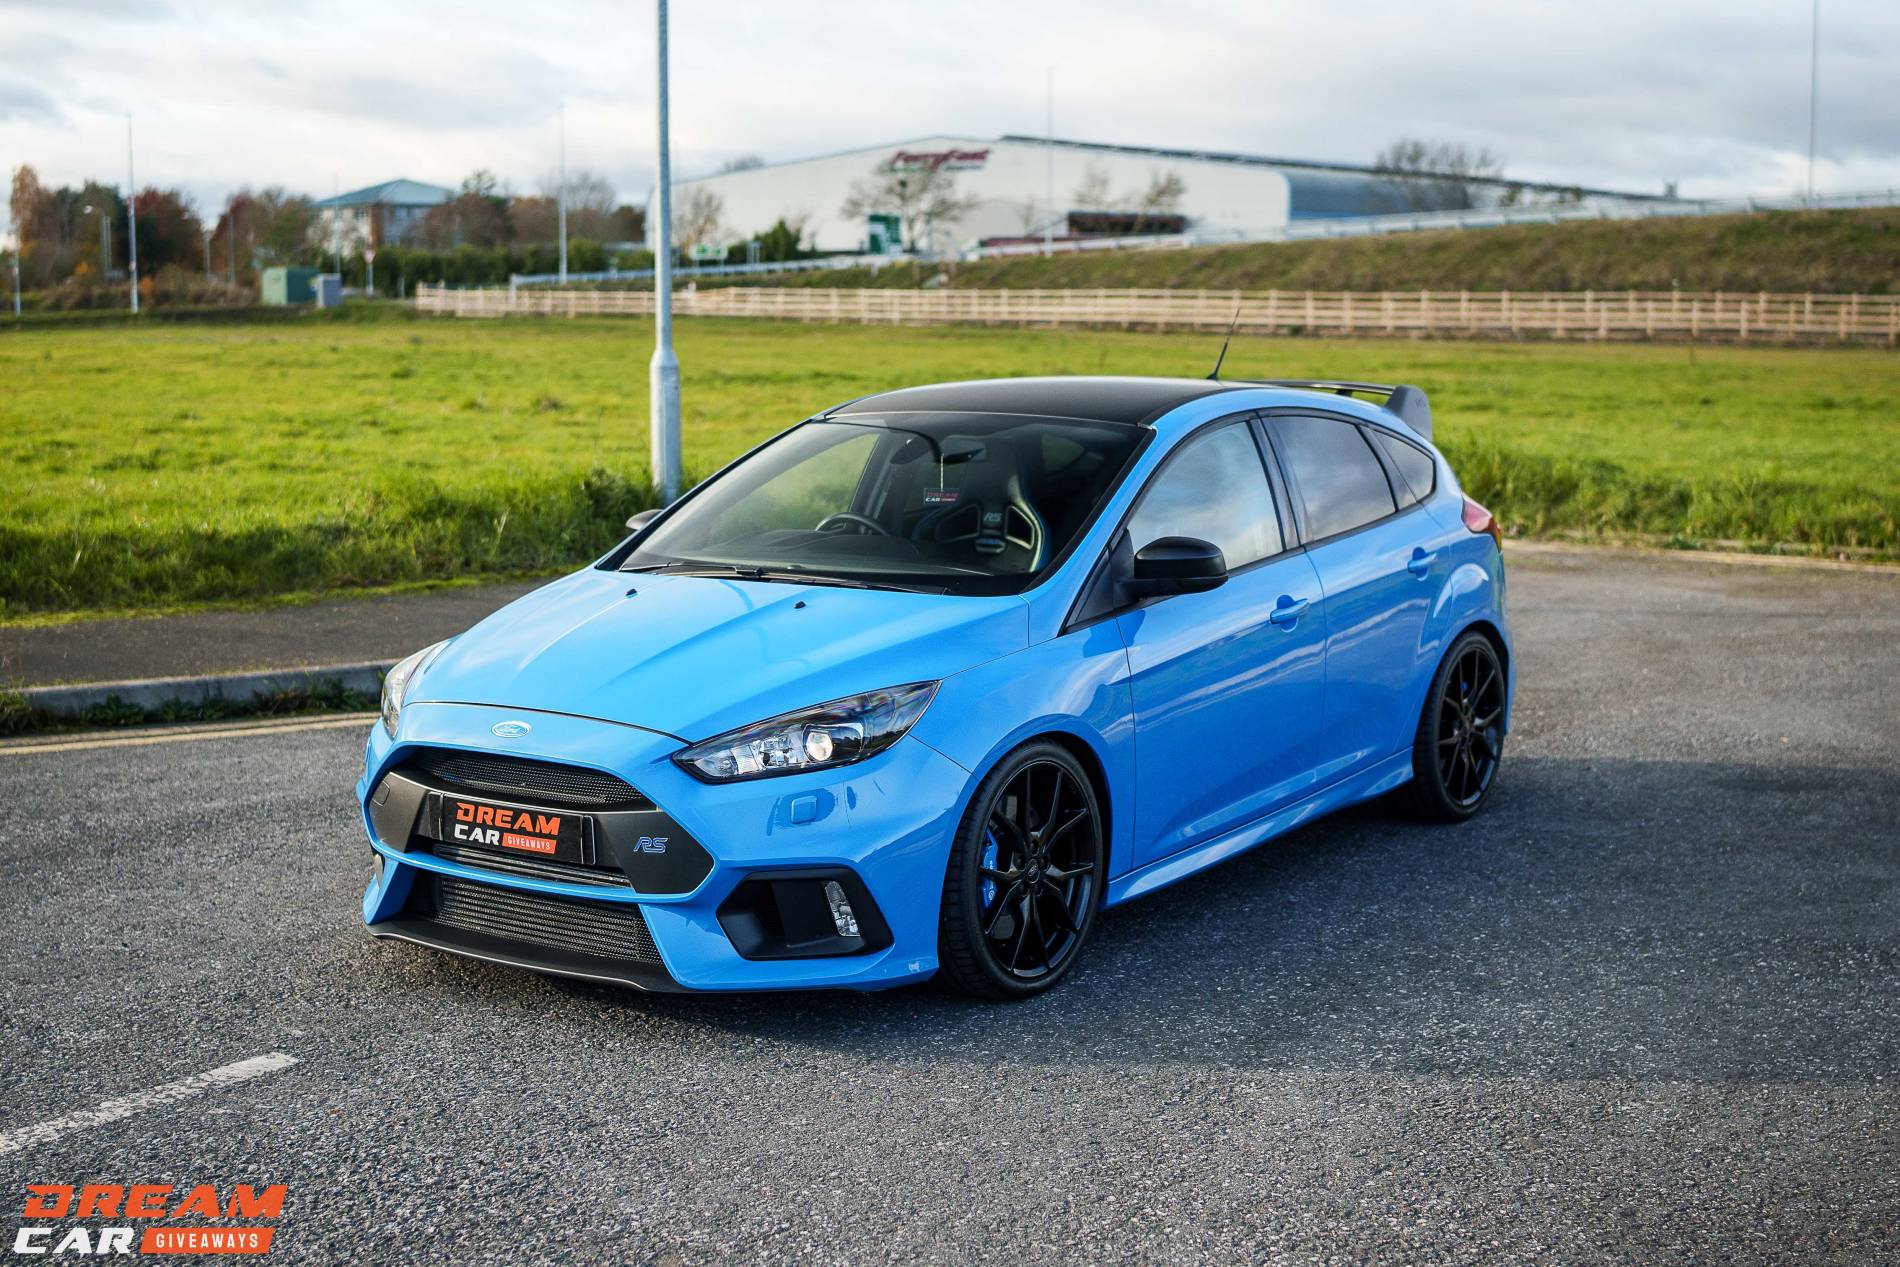 Ford Focus RS & £1,000 - Only 999 Entries